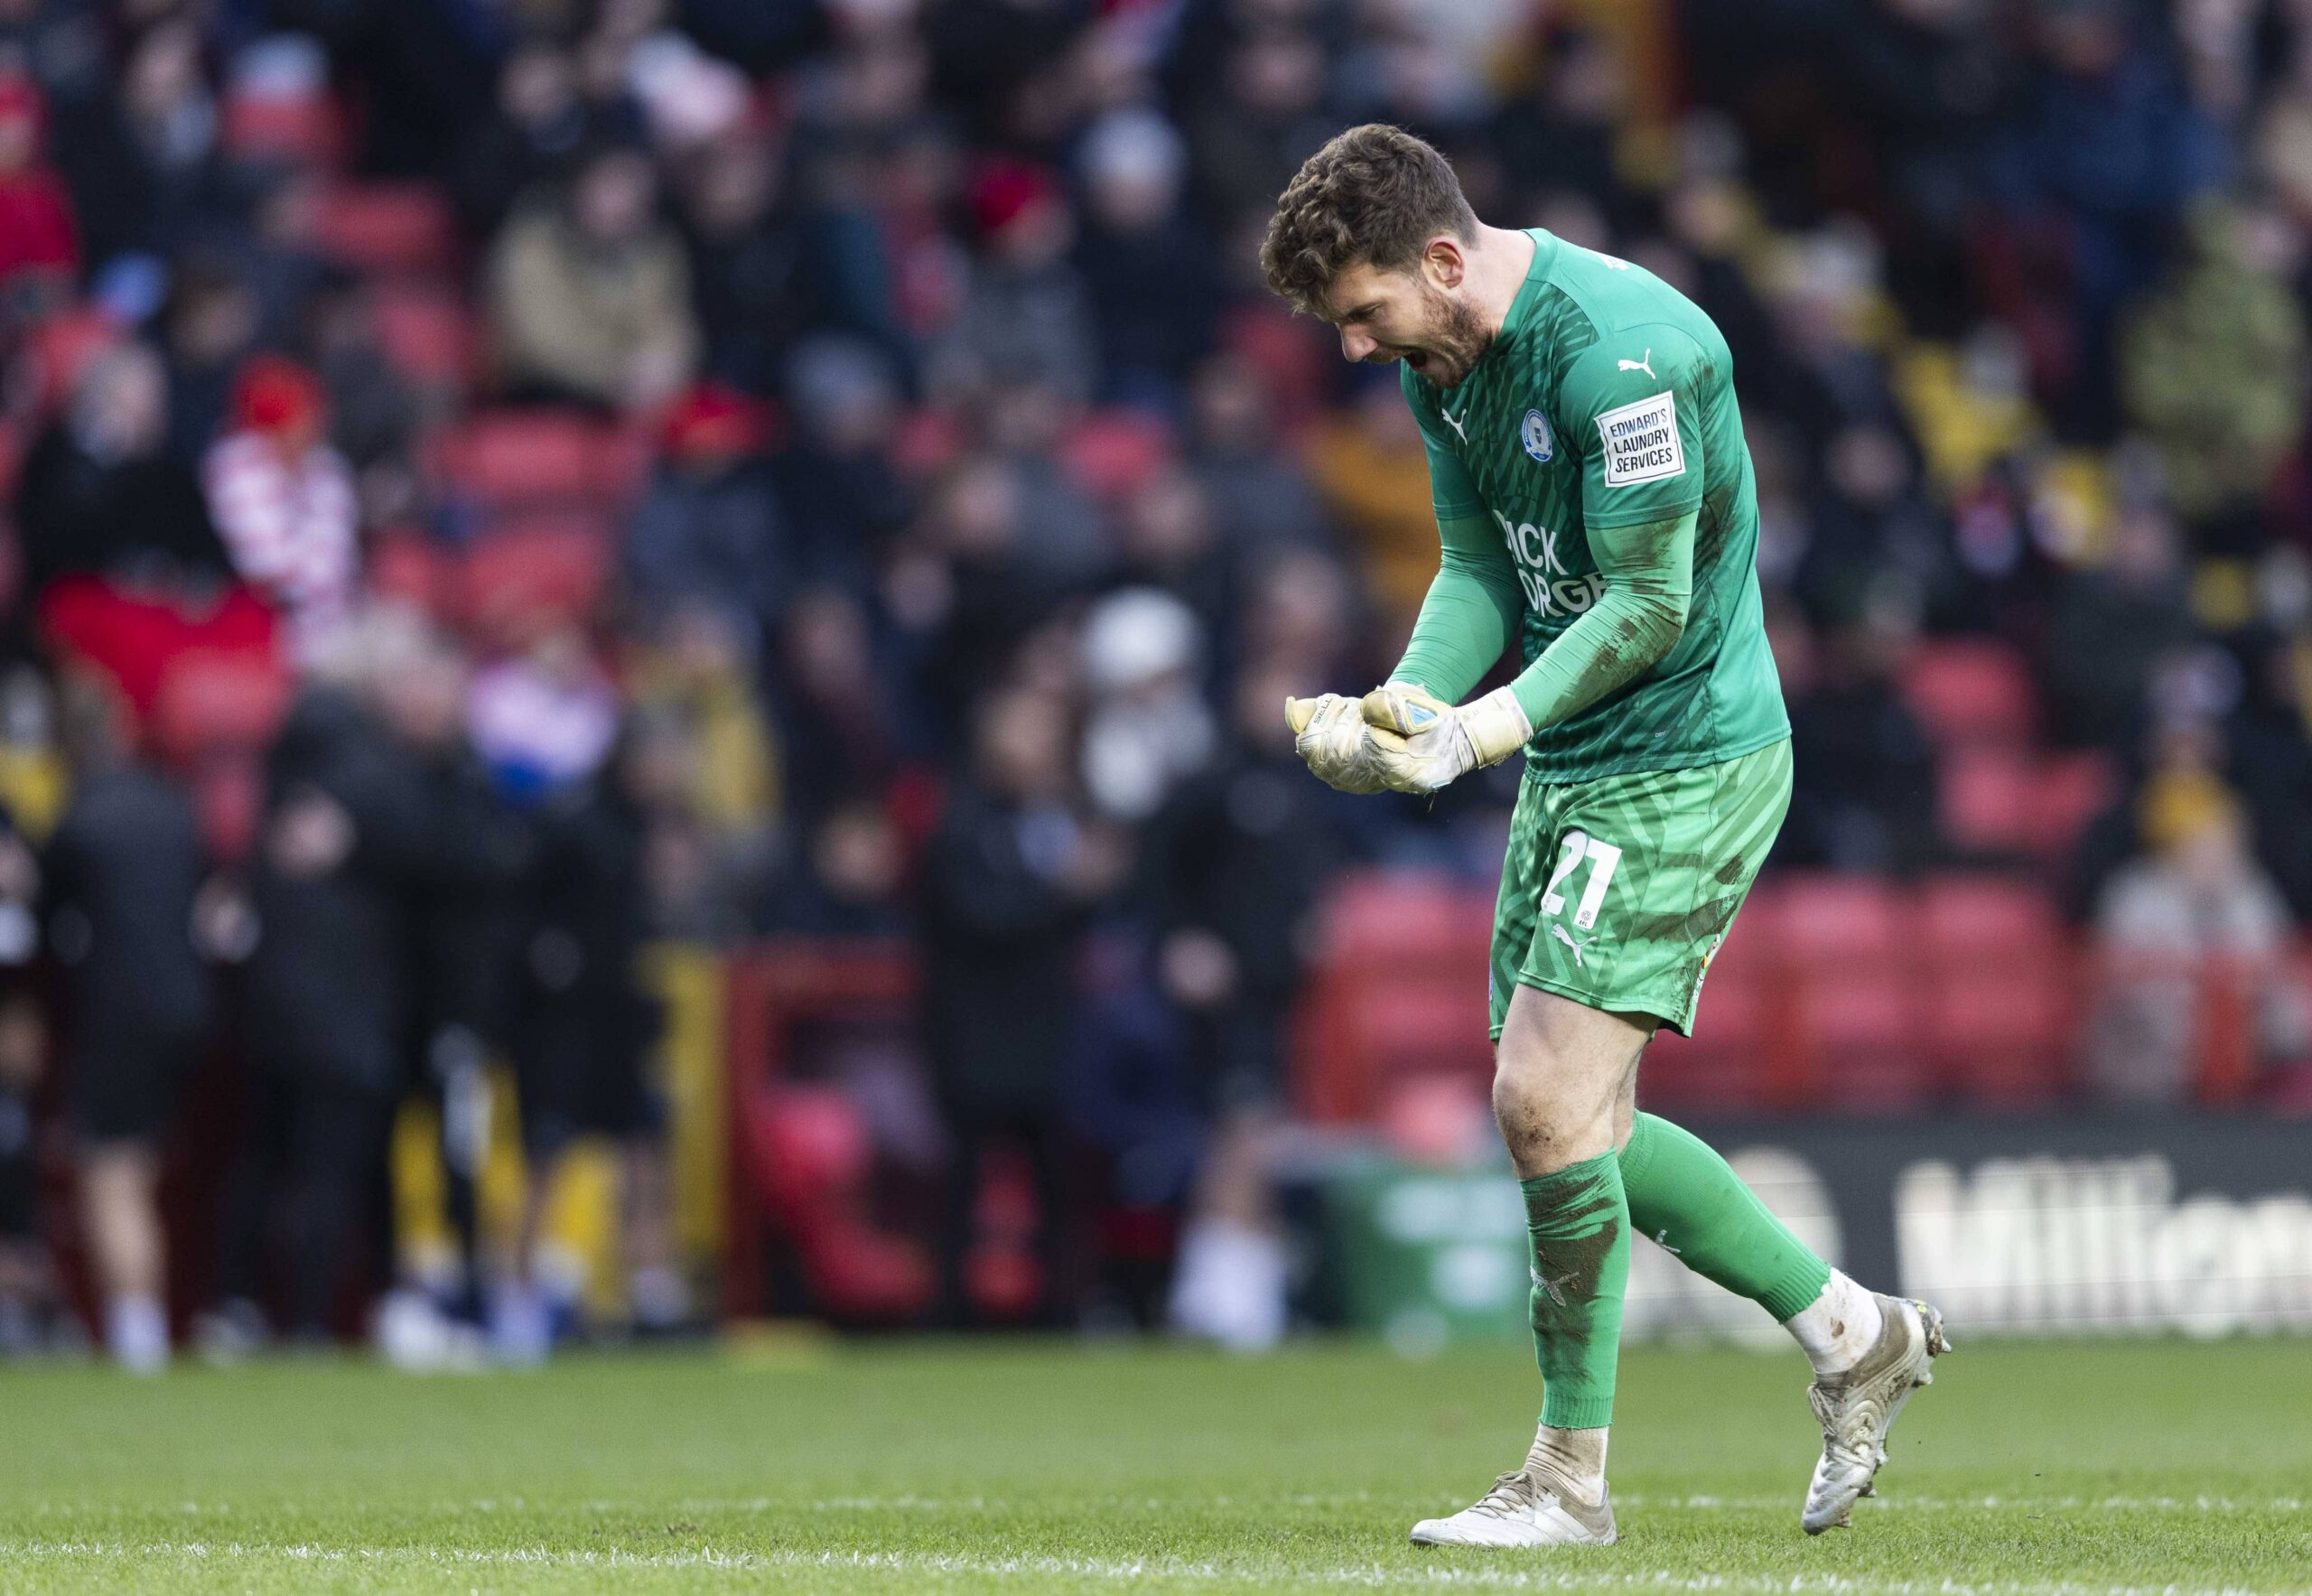 Charlton Athletic v Peterborough United Sky Bet League 1 Peterborough United goalkeeper Jed Steer celebrates after his sides first goal during the Sky Bet League 1 match between Charlton Athletic and Peterborough United at The Valley, London Copyright: xBenxPetersx FIL-19488-0135